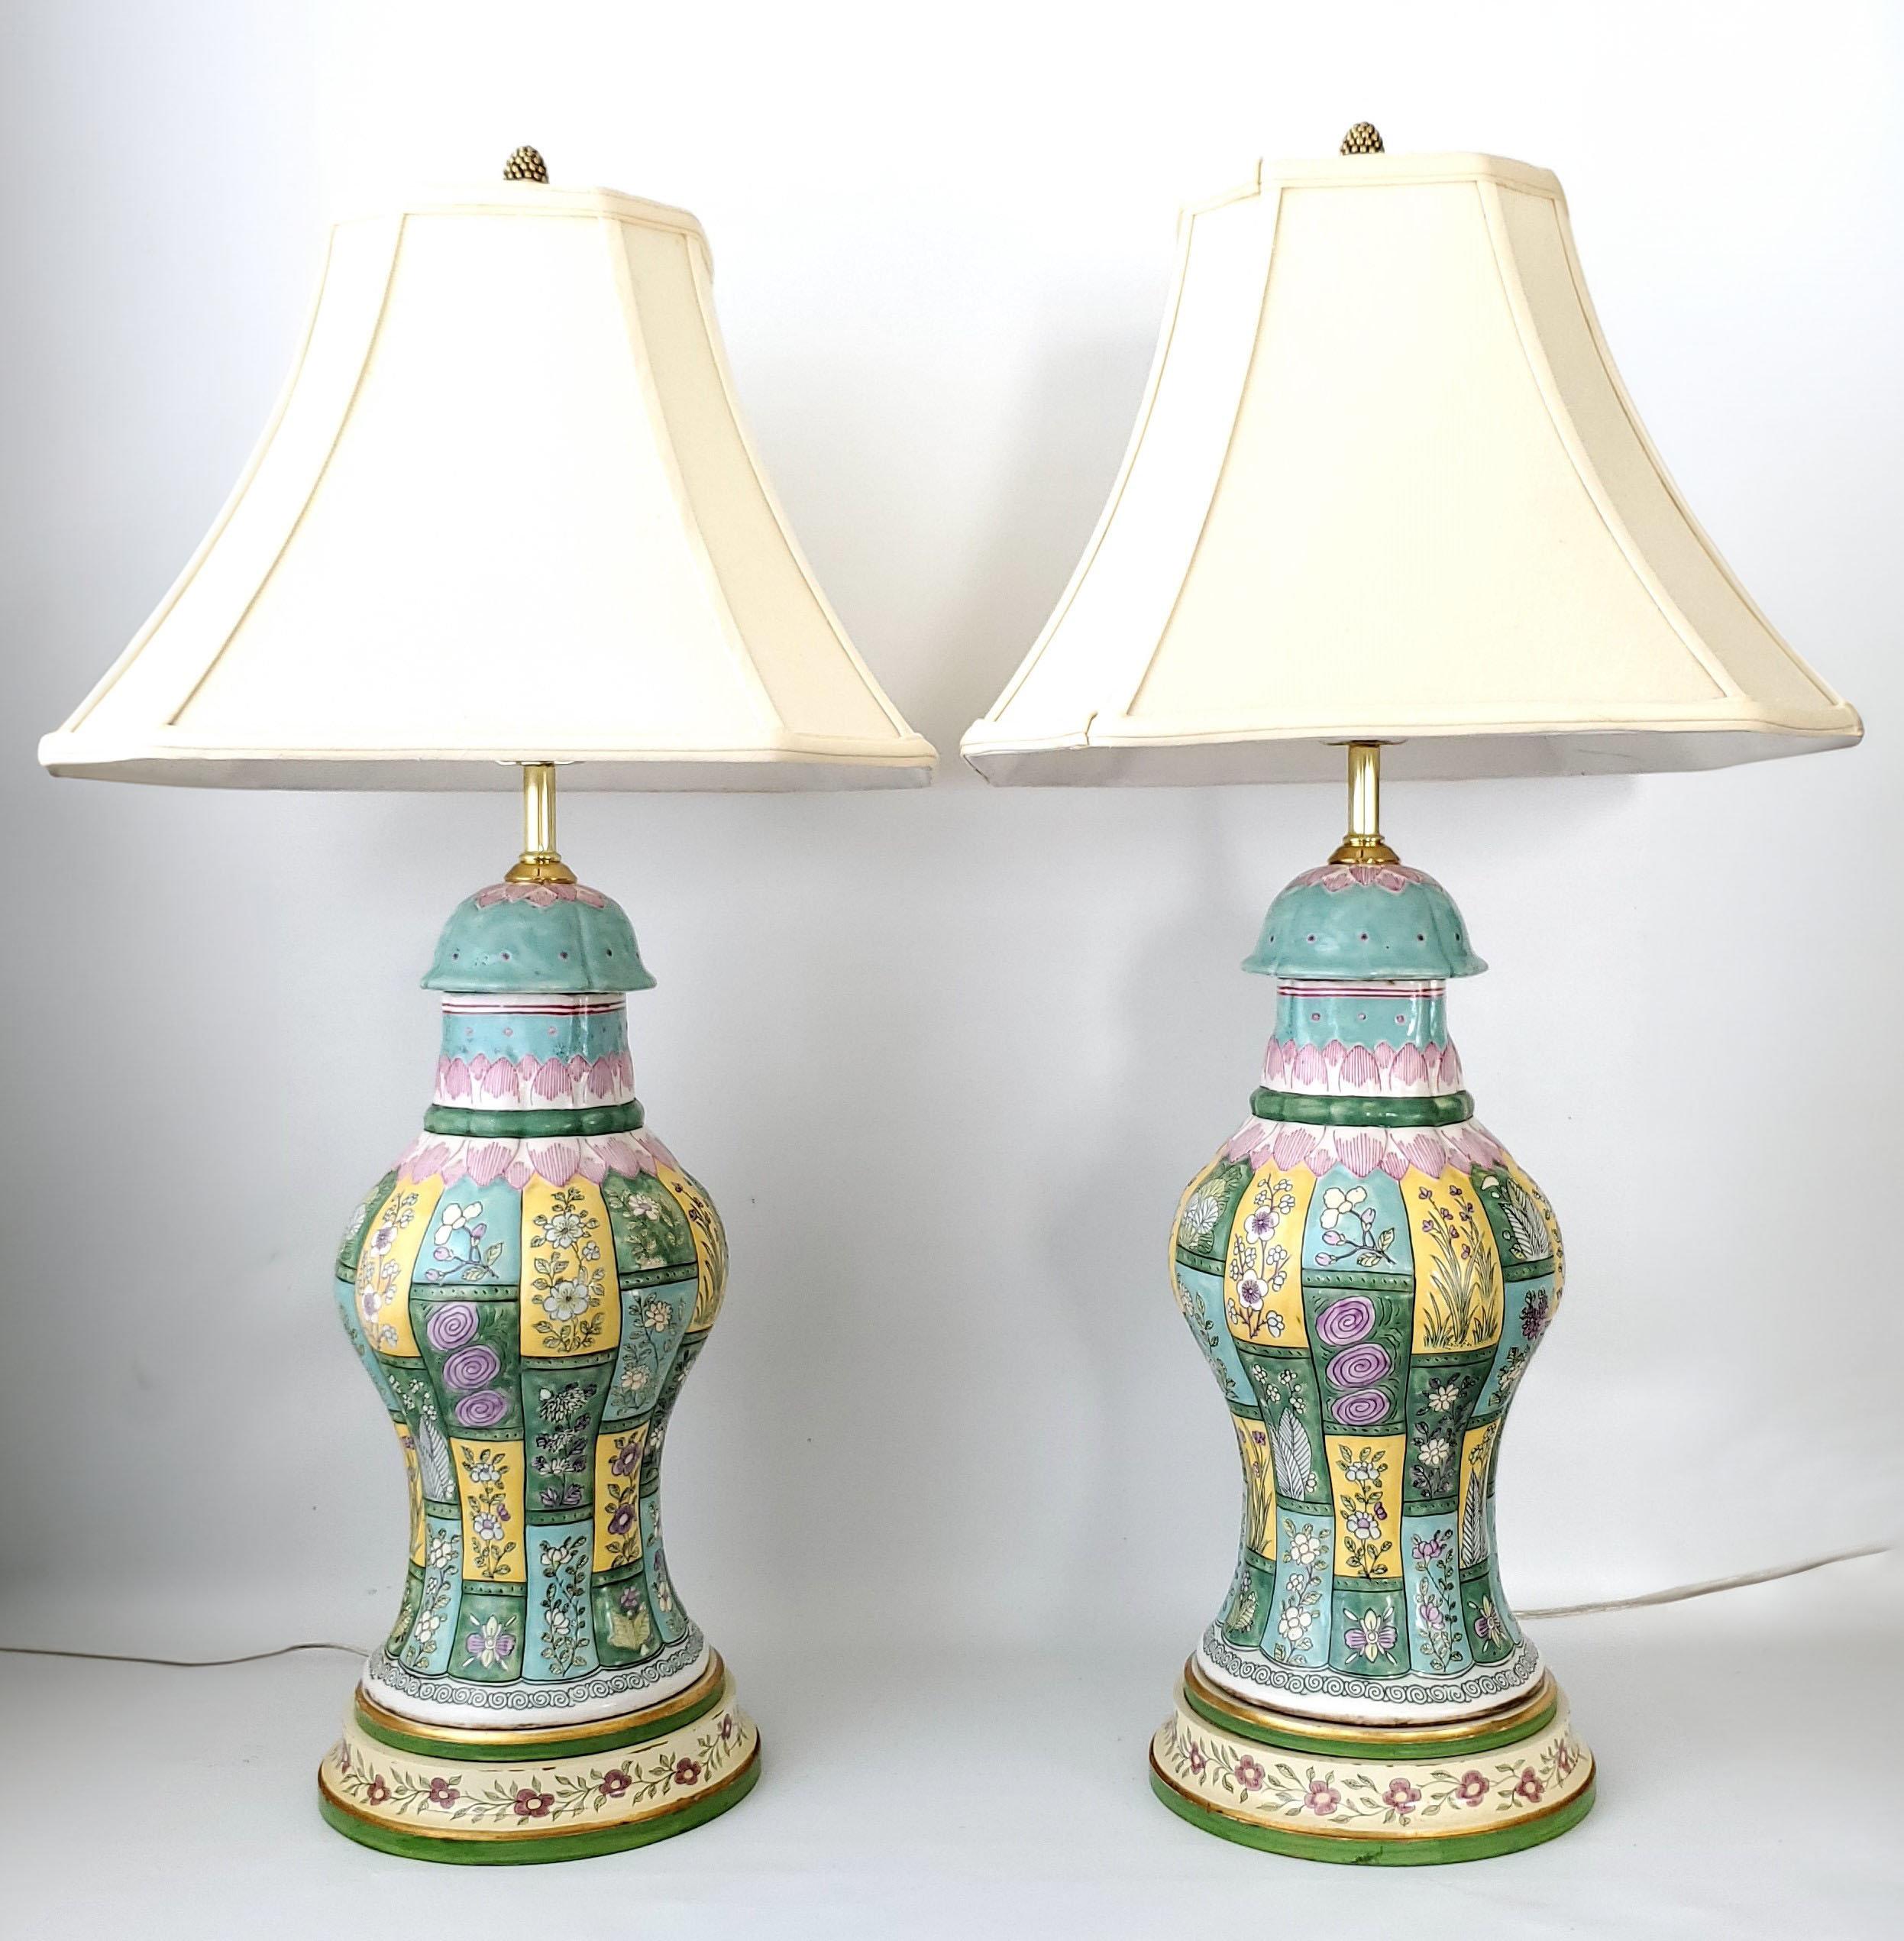 Pair of Vintage Chinese Porcelain Baluster Table Lamps with Linen & Silk Shades In Good Condition For Sale In Miami, FL